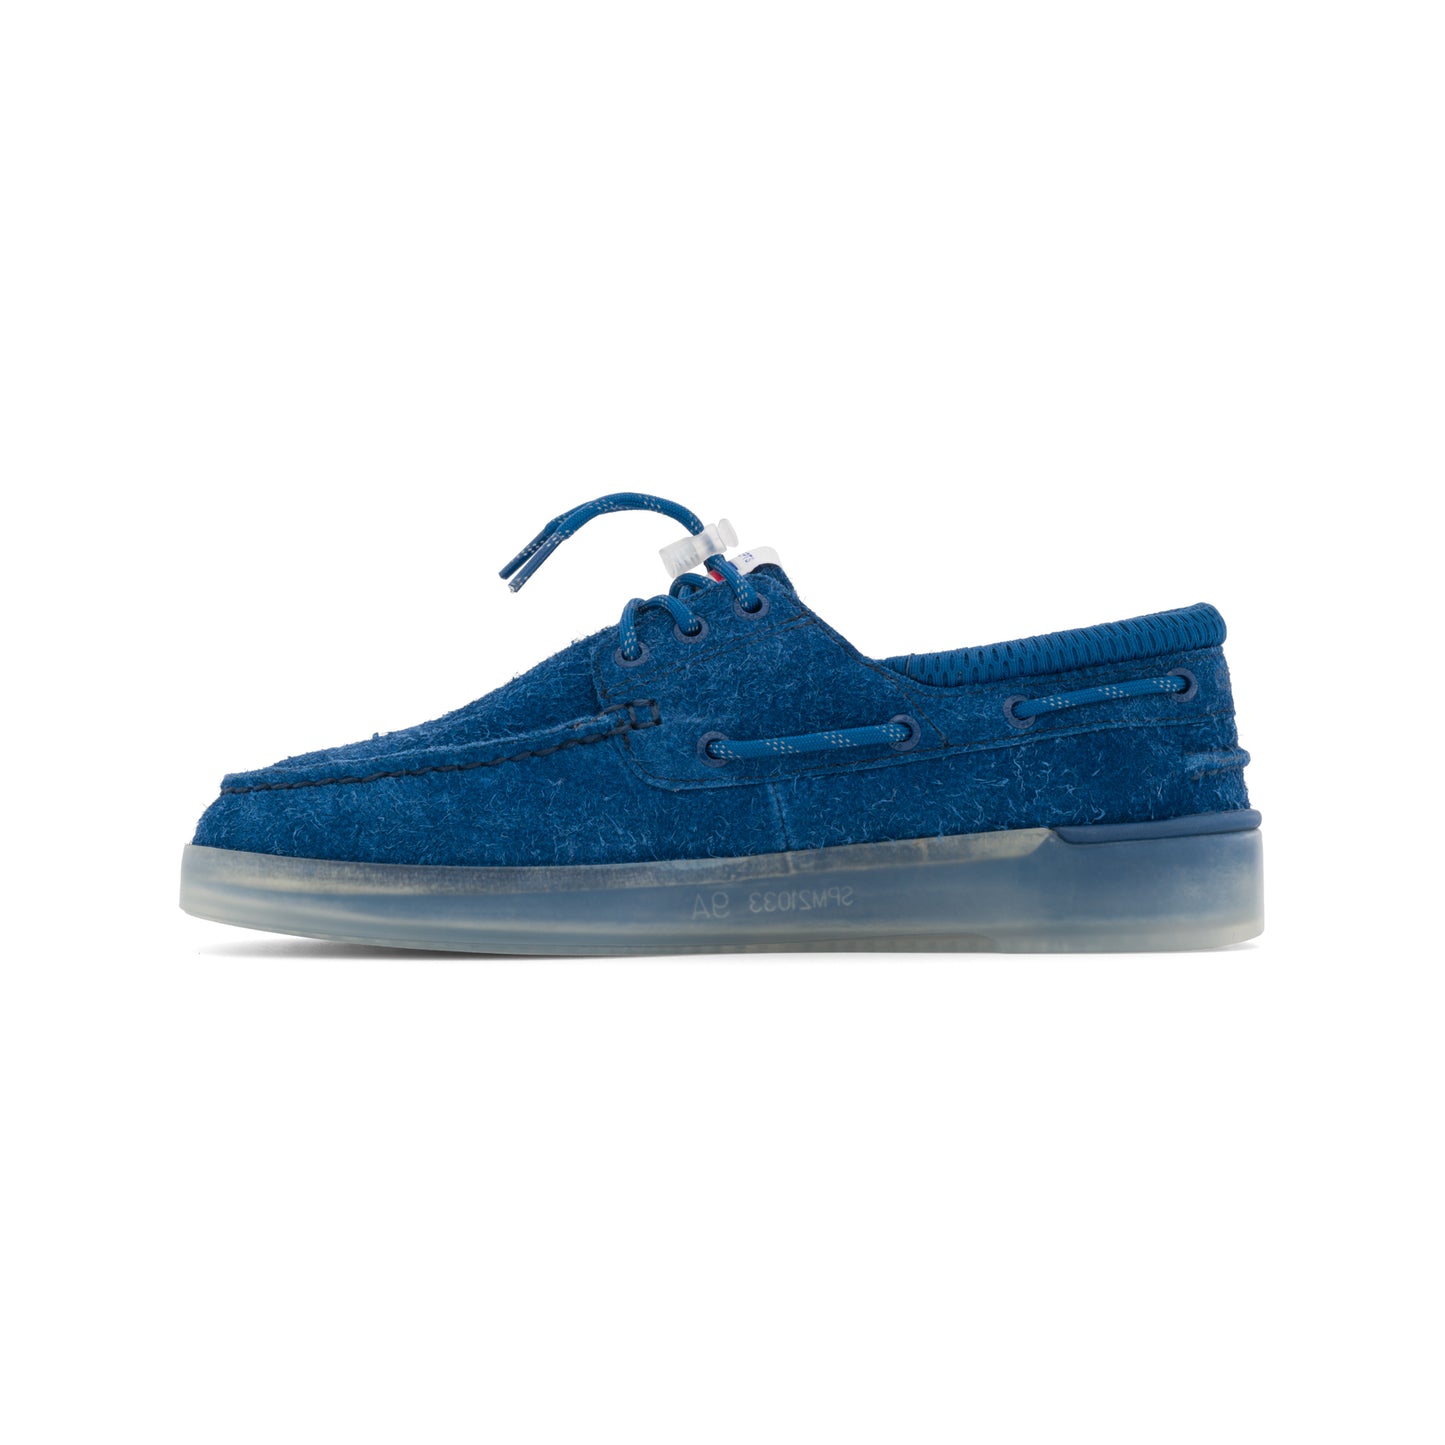 CNCPTS x Sperry Authentic Original 3-Eye Cup (Dusk Navy)